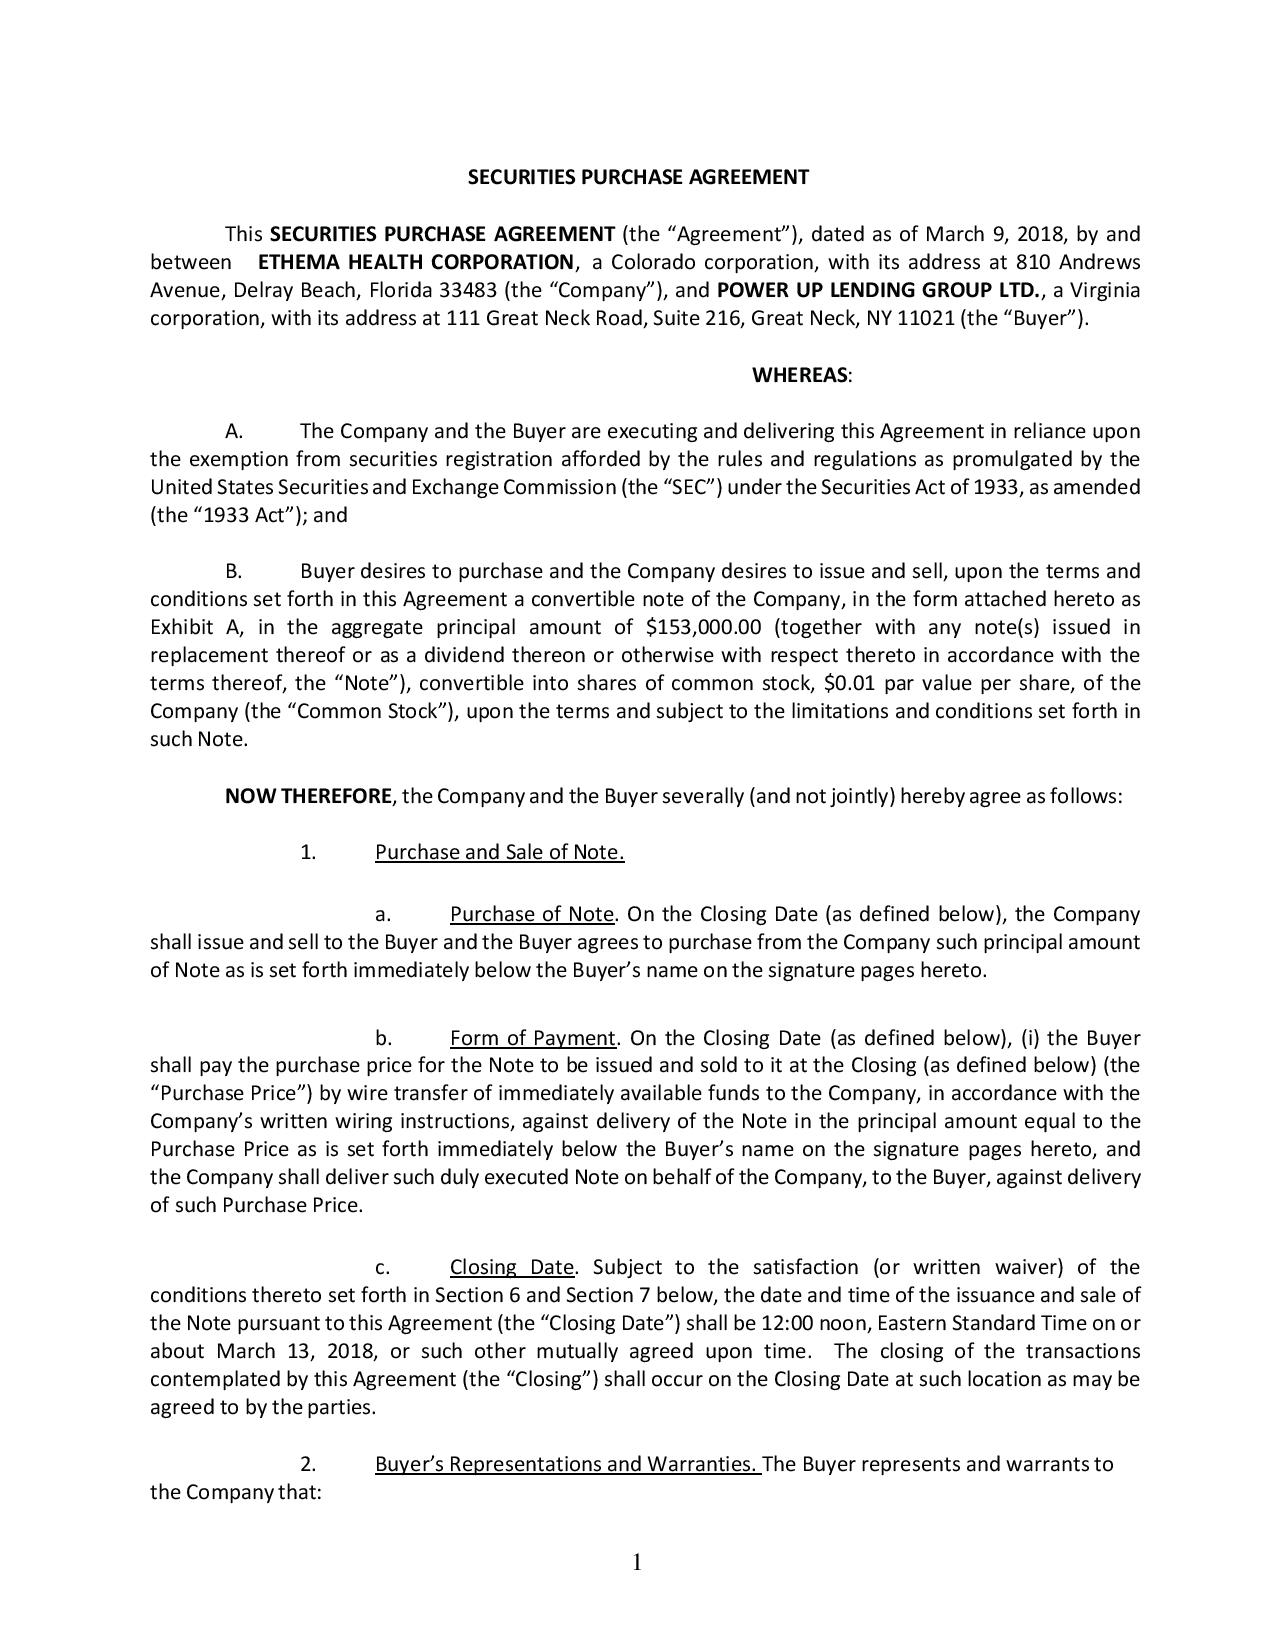 Convertible Promissory Note Purchase Agreement Form 8 K Ethema Health Corp For Mar 09